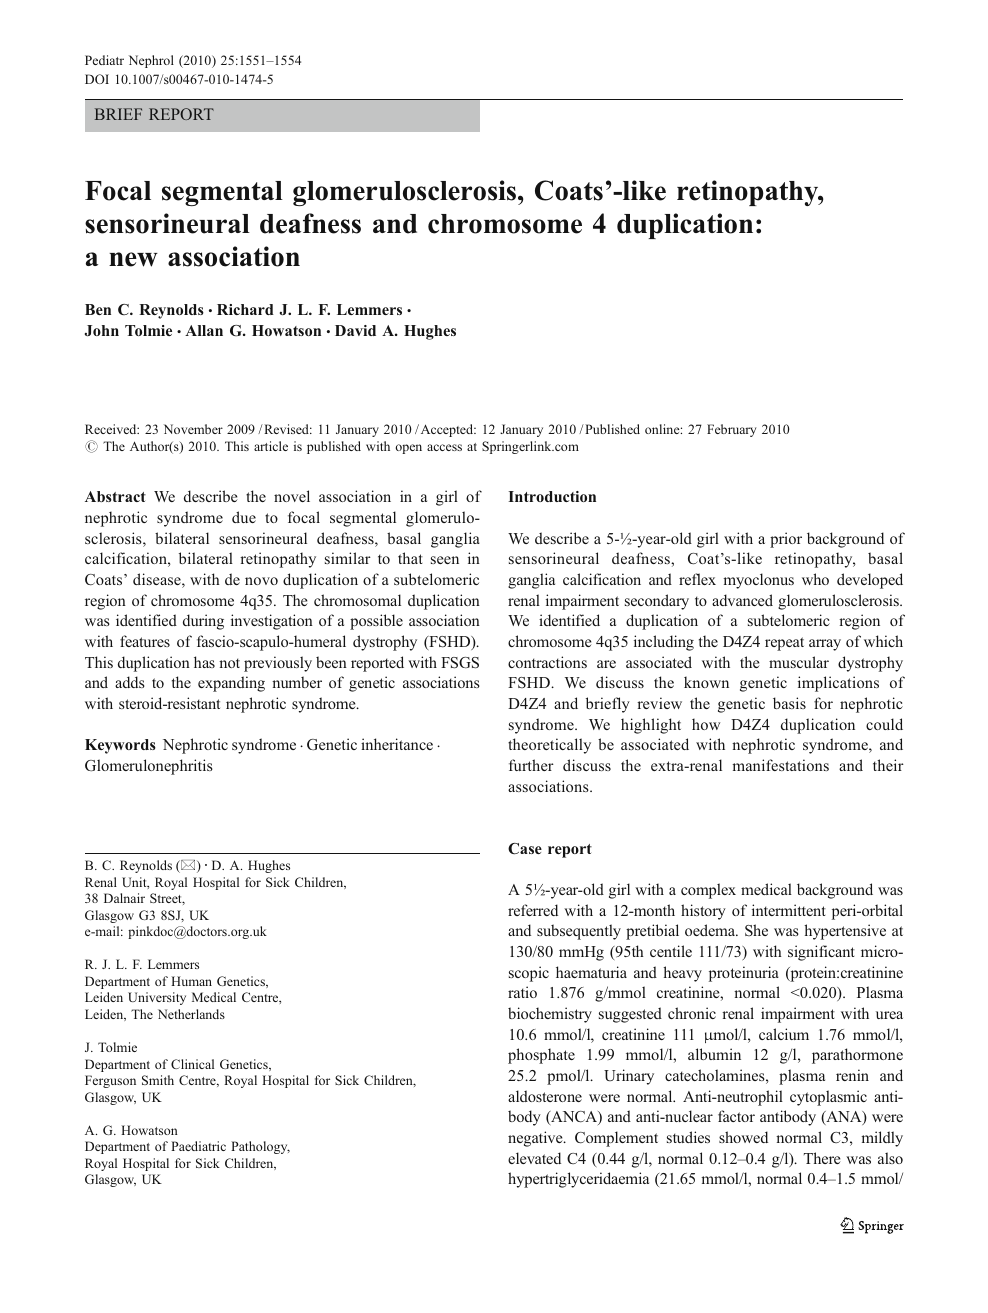 Focal Segmental Glomerulosclerosis Coats Like Retinopathy Sensorineural Deafness And Chromosome 4 Duplication A New Association Topic Of Research Paper In Clinical Medicine Download Scholarly Article Pdf And Read For Free On Cyberleninka